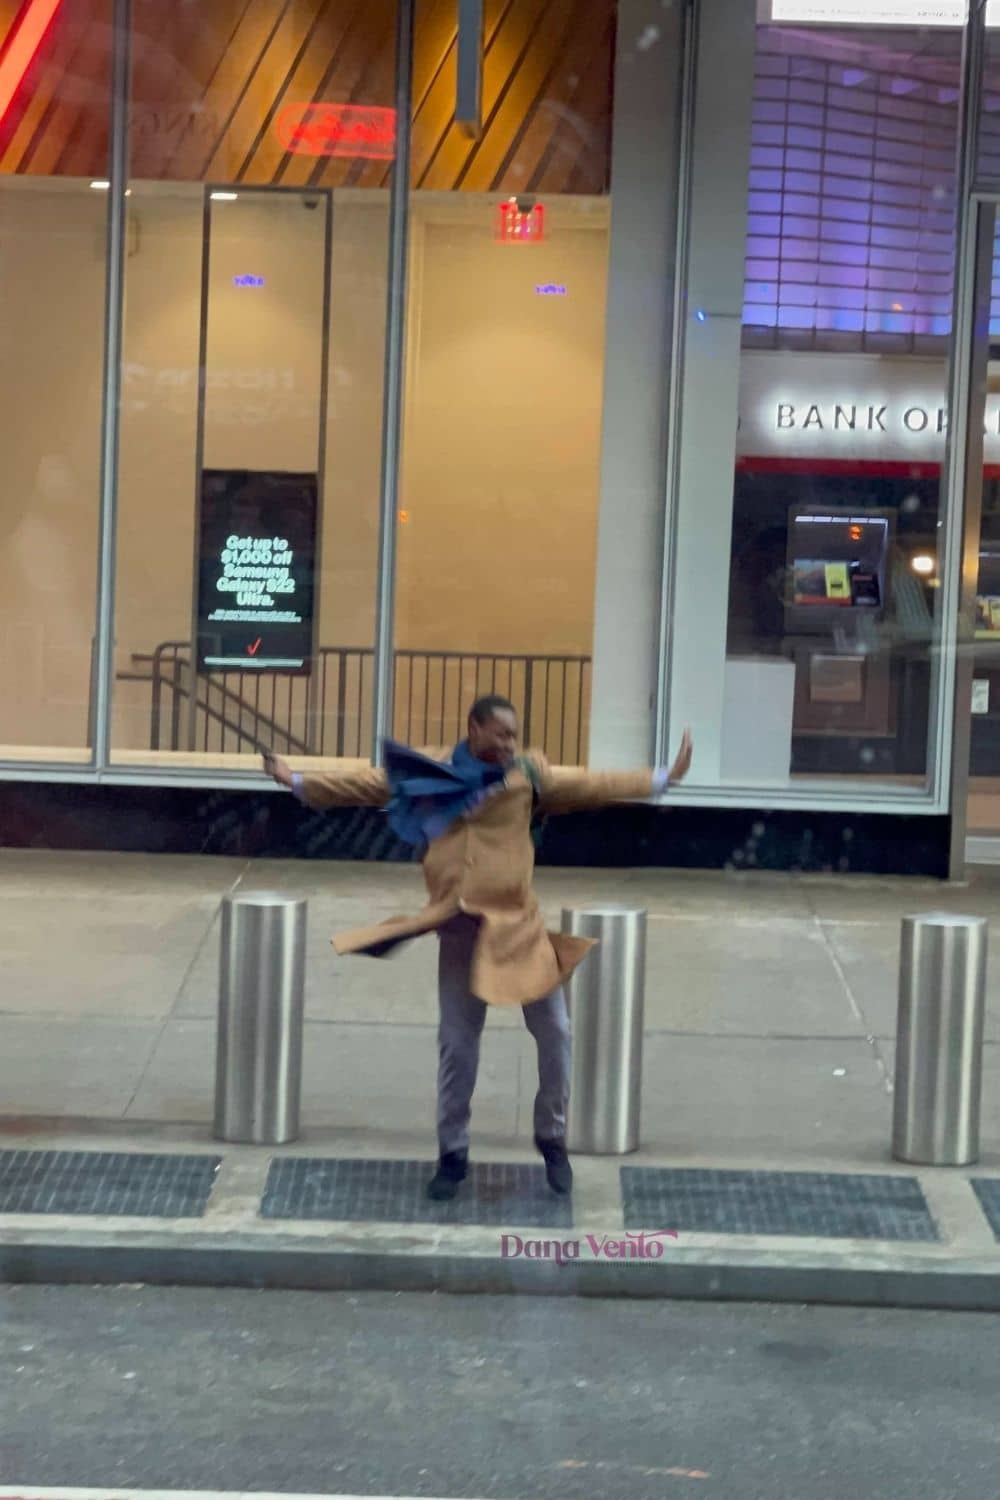 NYC Bus Ride Offers the Greatest Live Show and his businessman began to dance for our bus